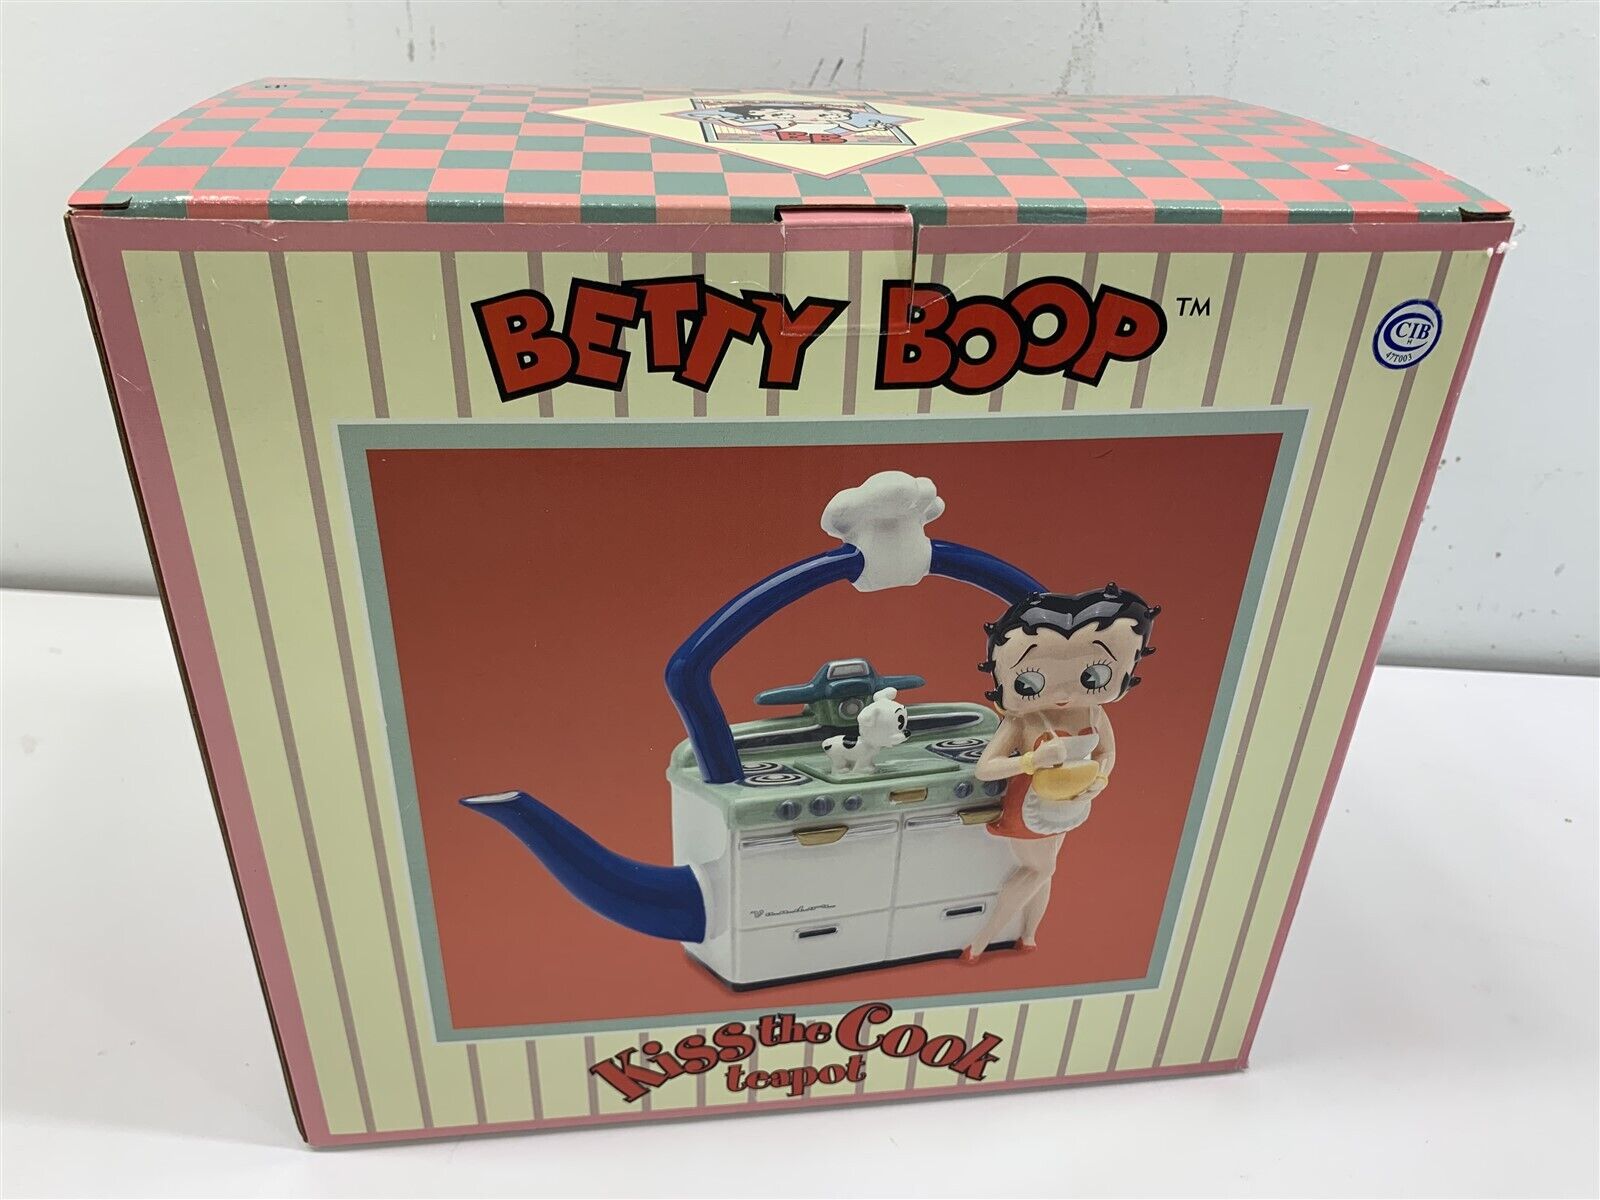 NEW IN BOX Vintage Betty Boop 2003 “Kiss The Cook” Ceramic Collectible Teapot 